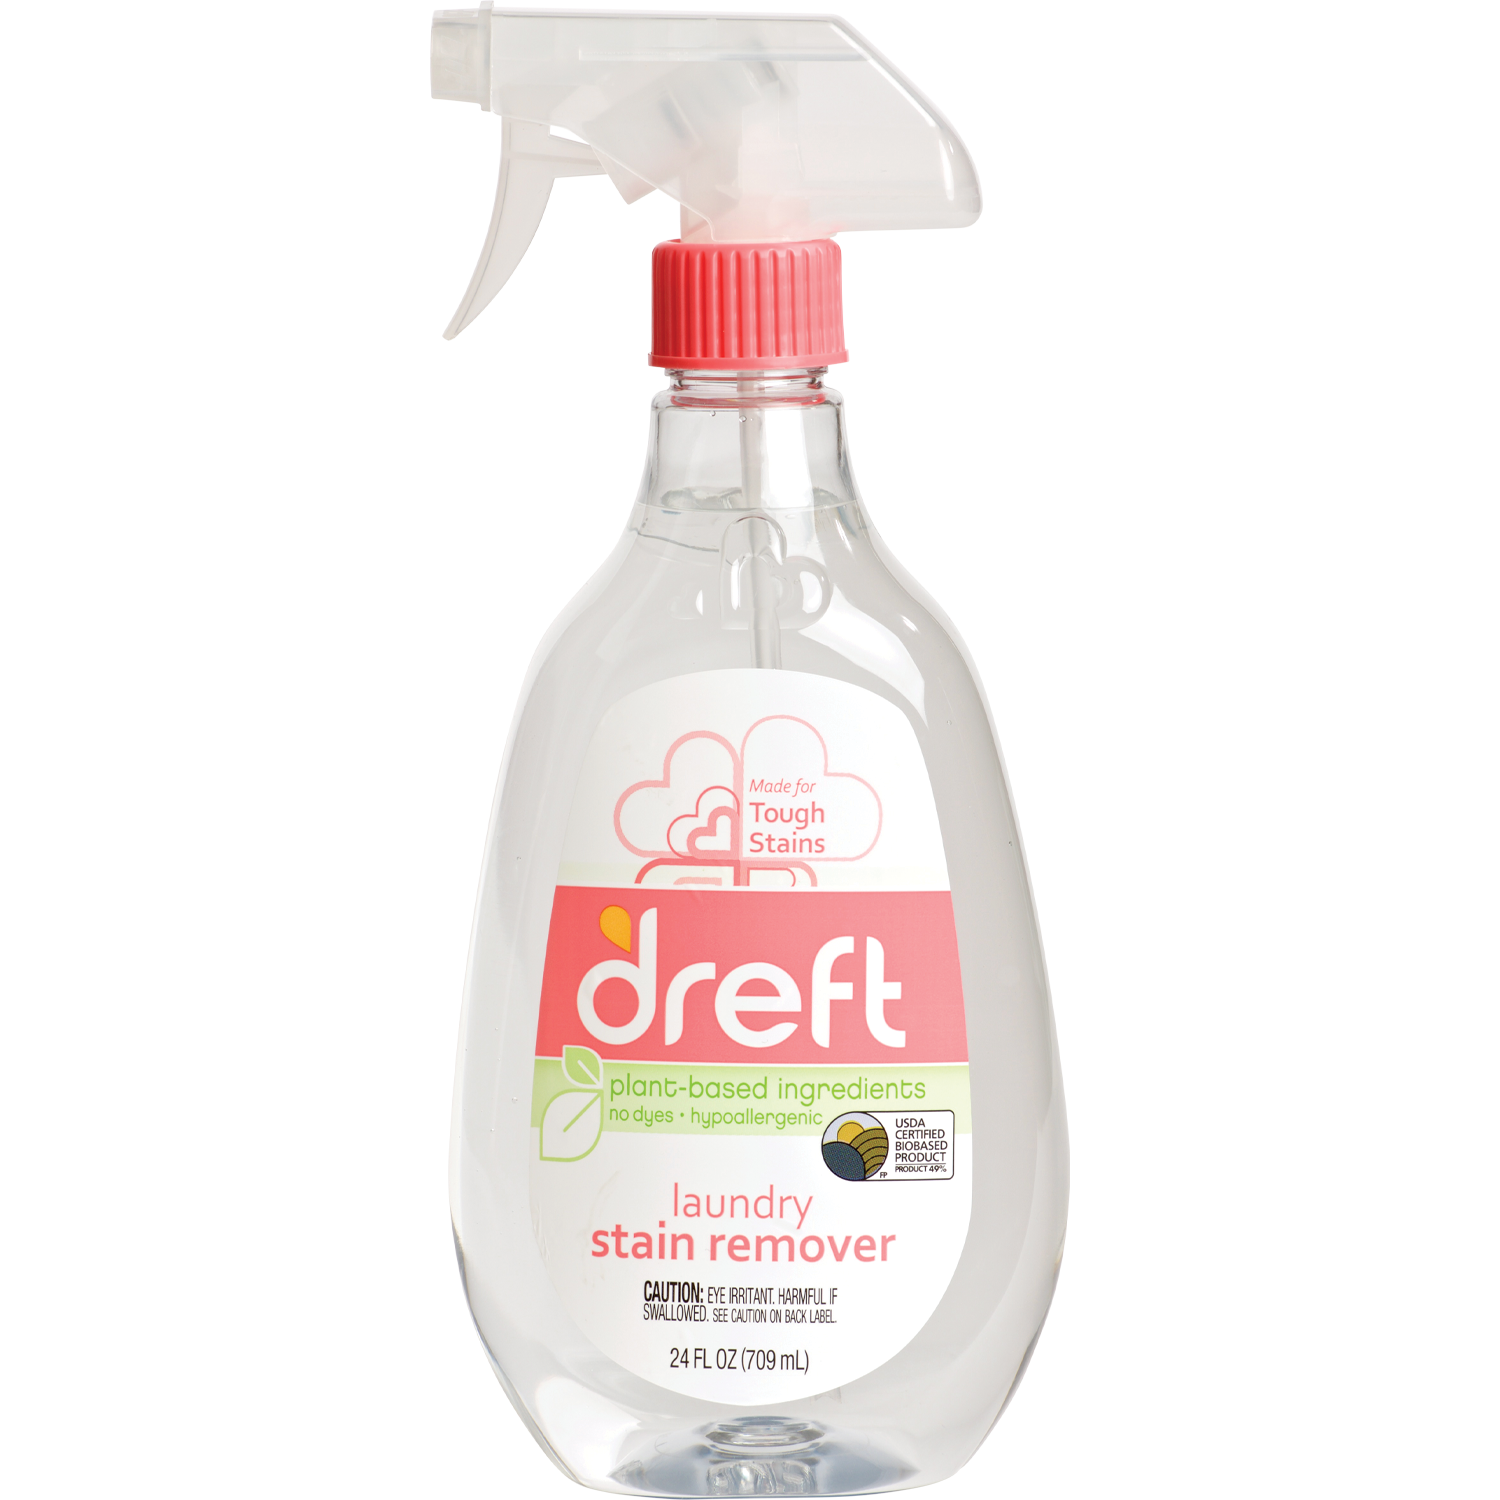 dreft-laundry-stain-remover-nehemiah-manufacturing